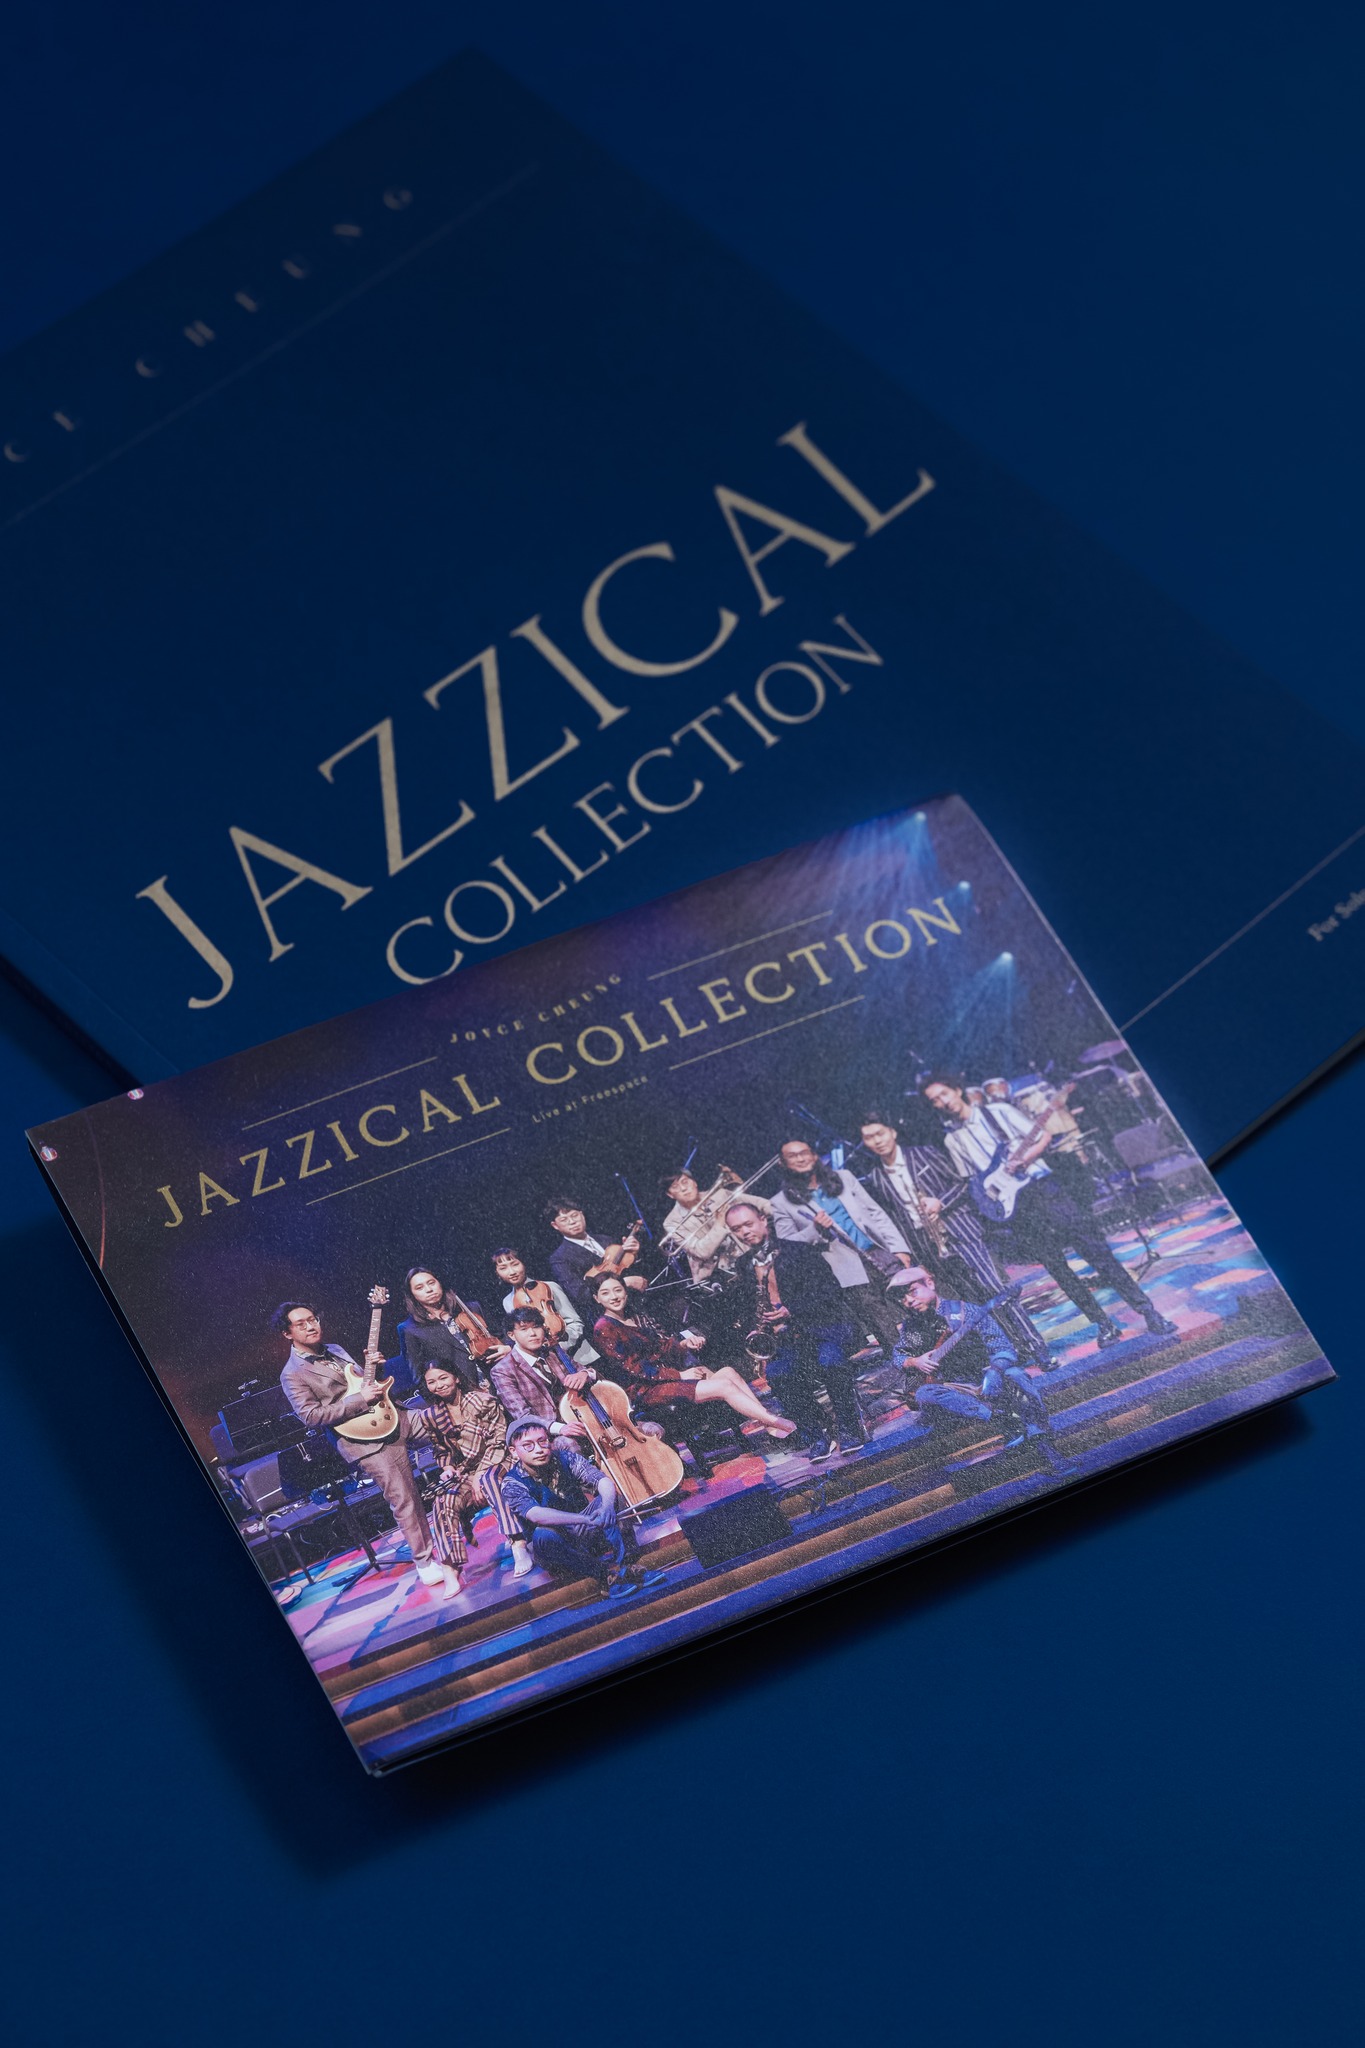 Jazzical Collection